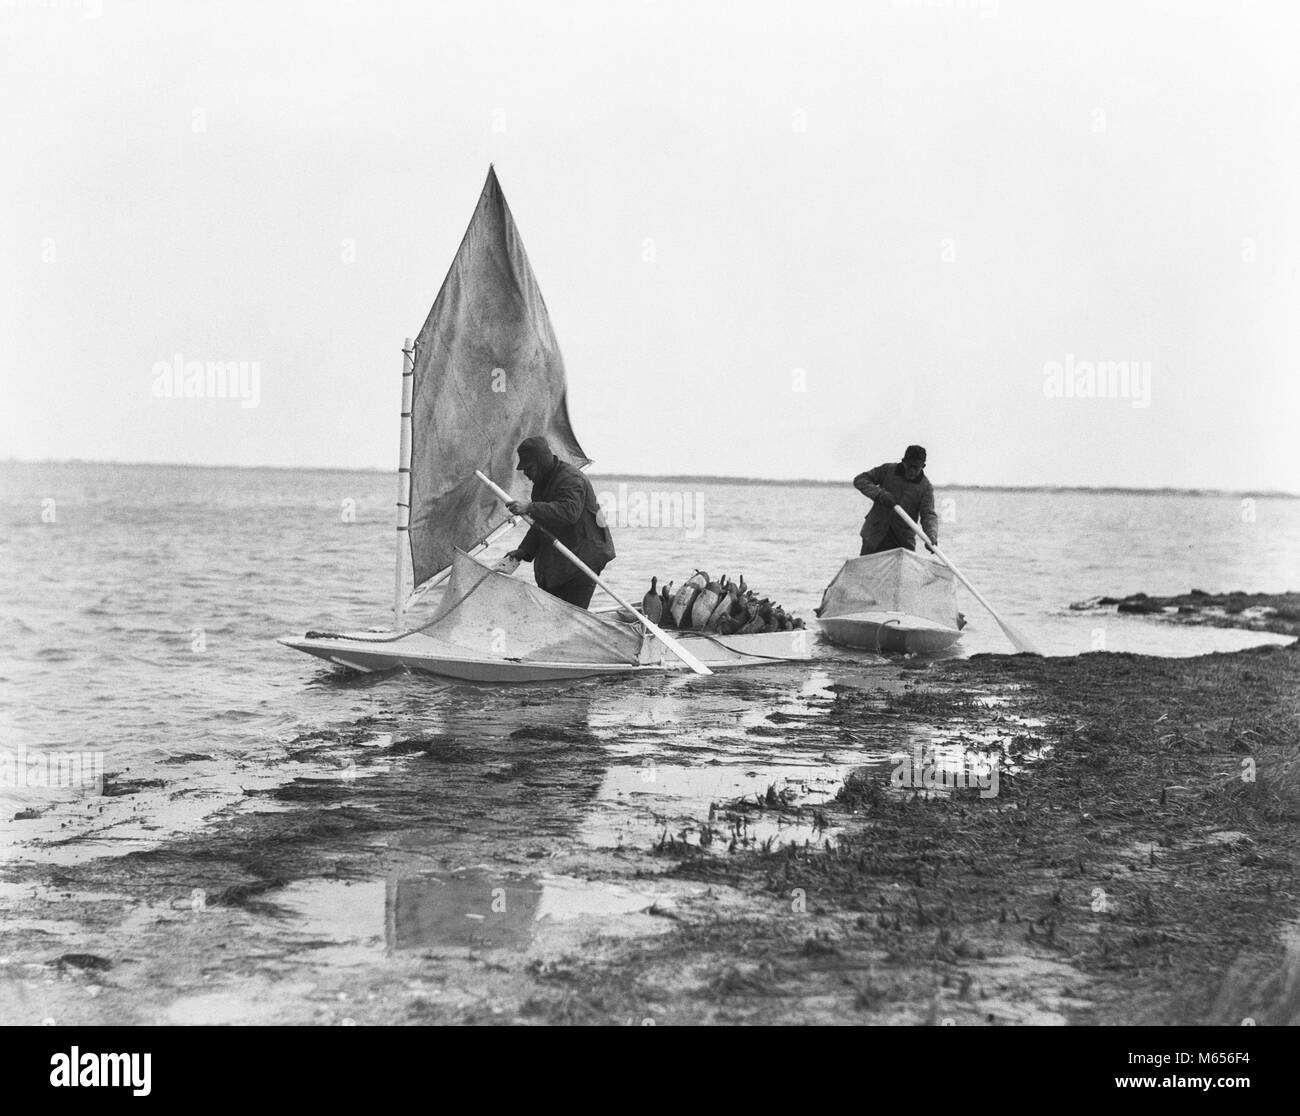 1920s 1930s TWO MEN IN SNEAKBOX BOATS FILLED WITH DUCK DECOYS IN MARSHES PREPARING TO DUCK HUNT BARNEGAT BAY NEW JERSEY USA - d331 HAR001 HARS TOGETHERNESS 25-30 YEARS 30-35 YEARS 35-40 YEARS FREEDOM OCCUPATION ADVENTURE CANVAS STRATEGY CAREERS KNOWLEDGE RECREATION COOPERATION DECOYS NEW JERSEY FILLED HUNTERS MALES MID-ADULT MID-ADULT MAN PADDLING SNEAKBOX B&W BARNEGAT BAY BLACK AND WHITE MARSHES OCCUPATIONS OLD FASHIONED PERSONS Stock Photo